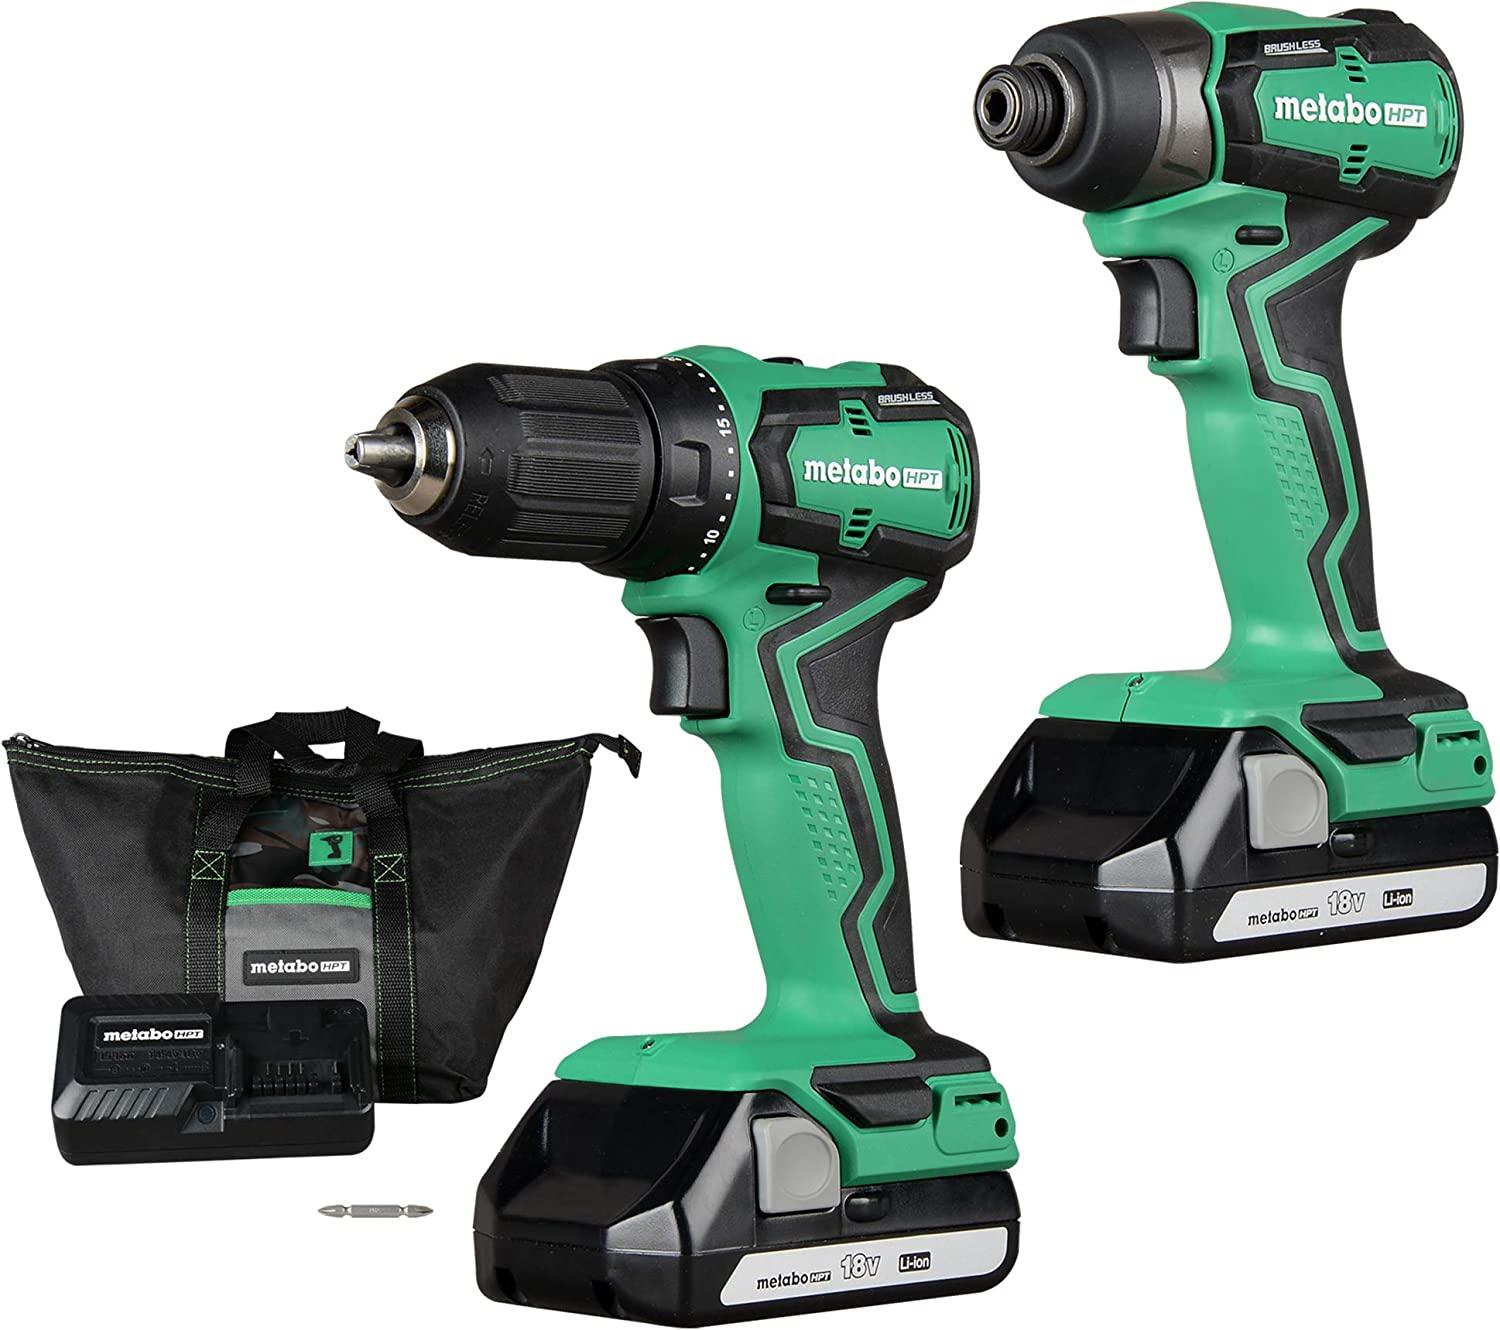 Metabo HPT Brushless Cordless 18V Drill and Impact Driver Combo Kit for $109 Shipped